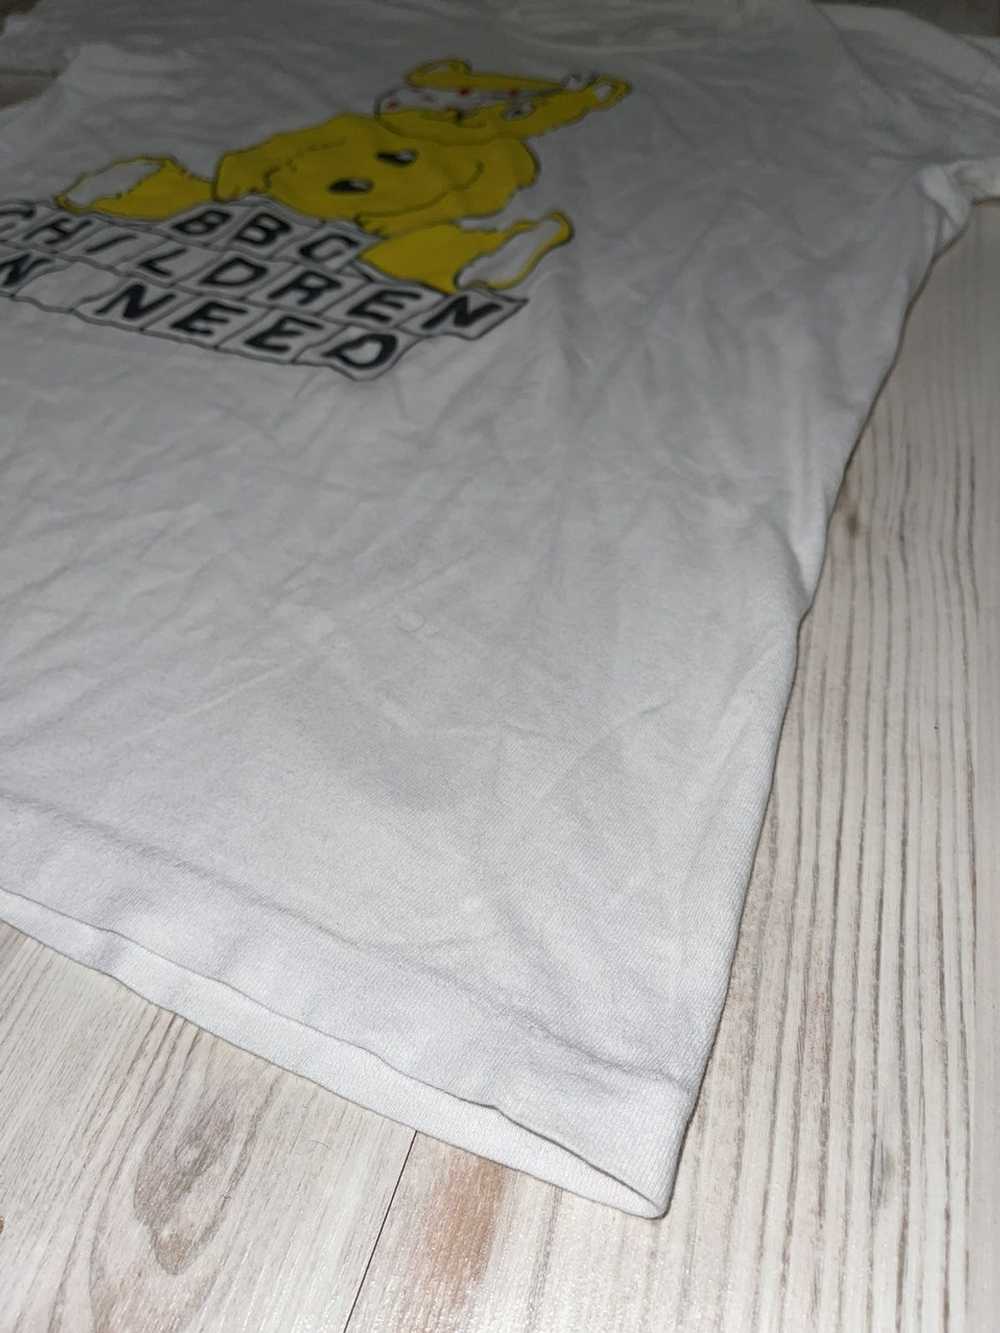 Band Tees × Vintage BBC Children In Need 80s vint… - image 9